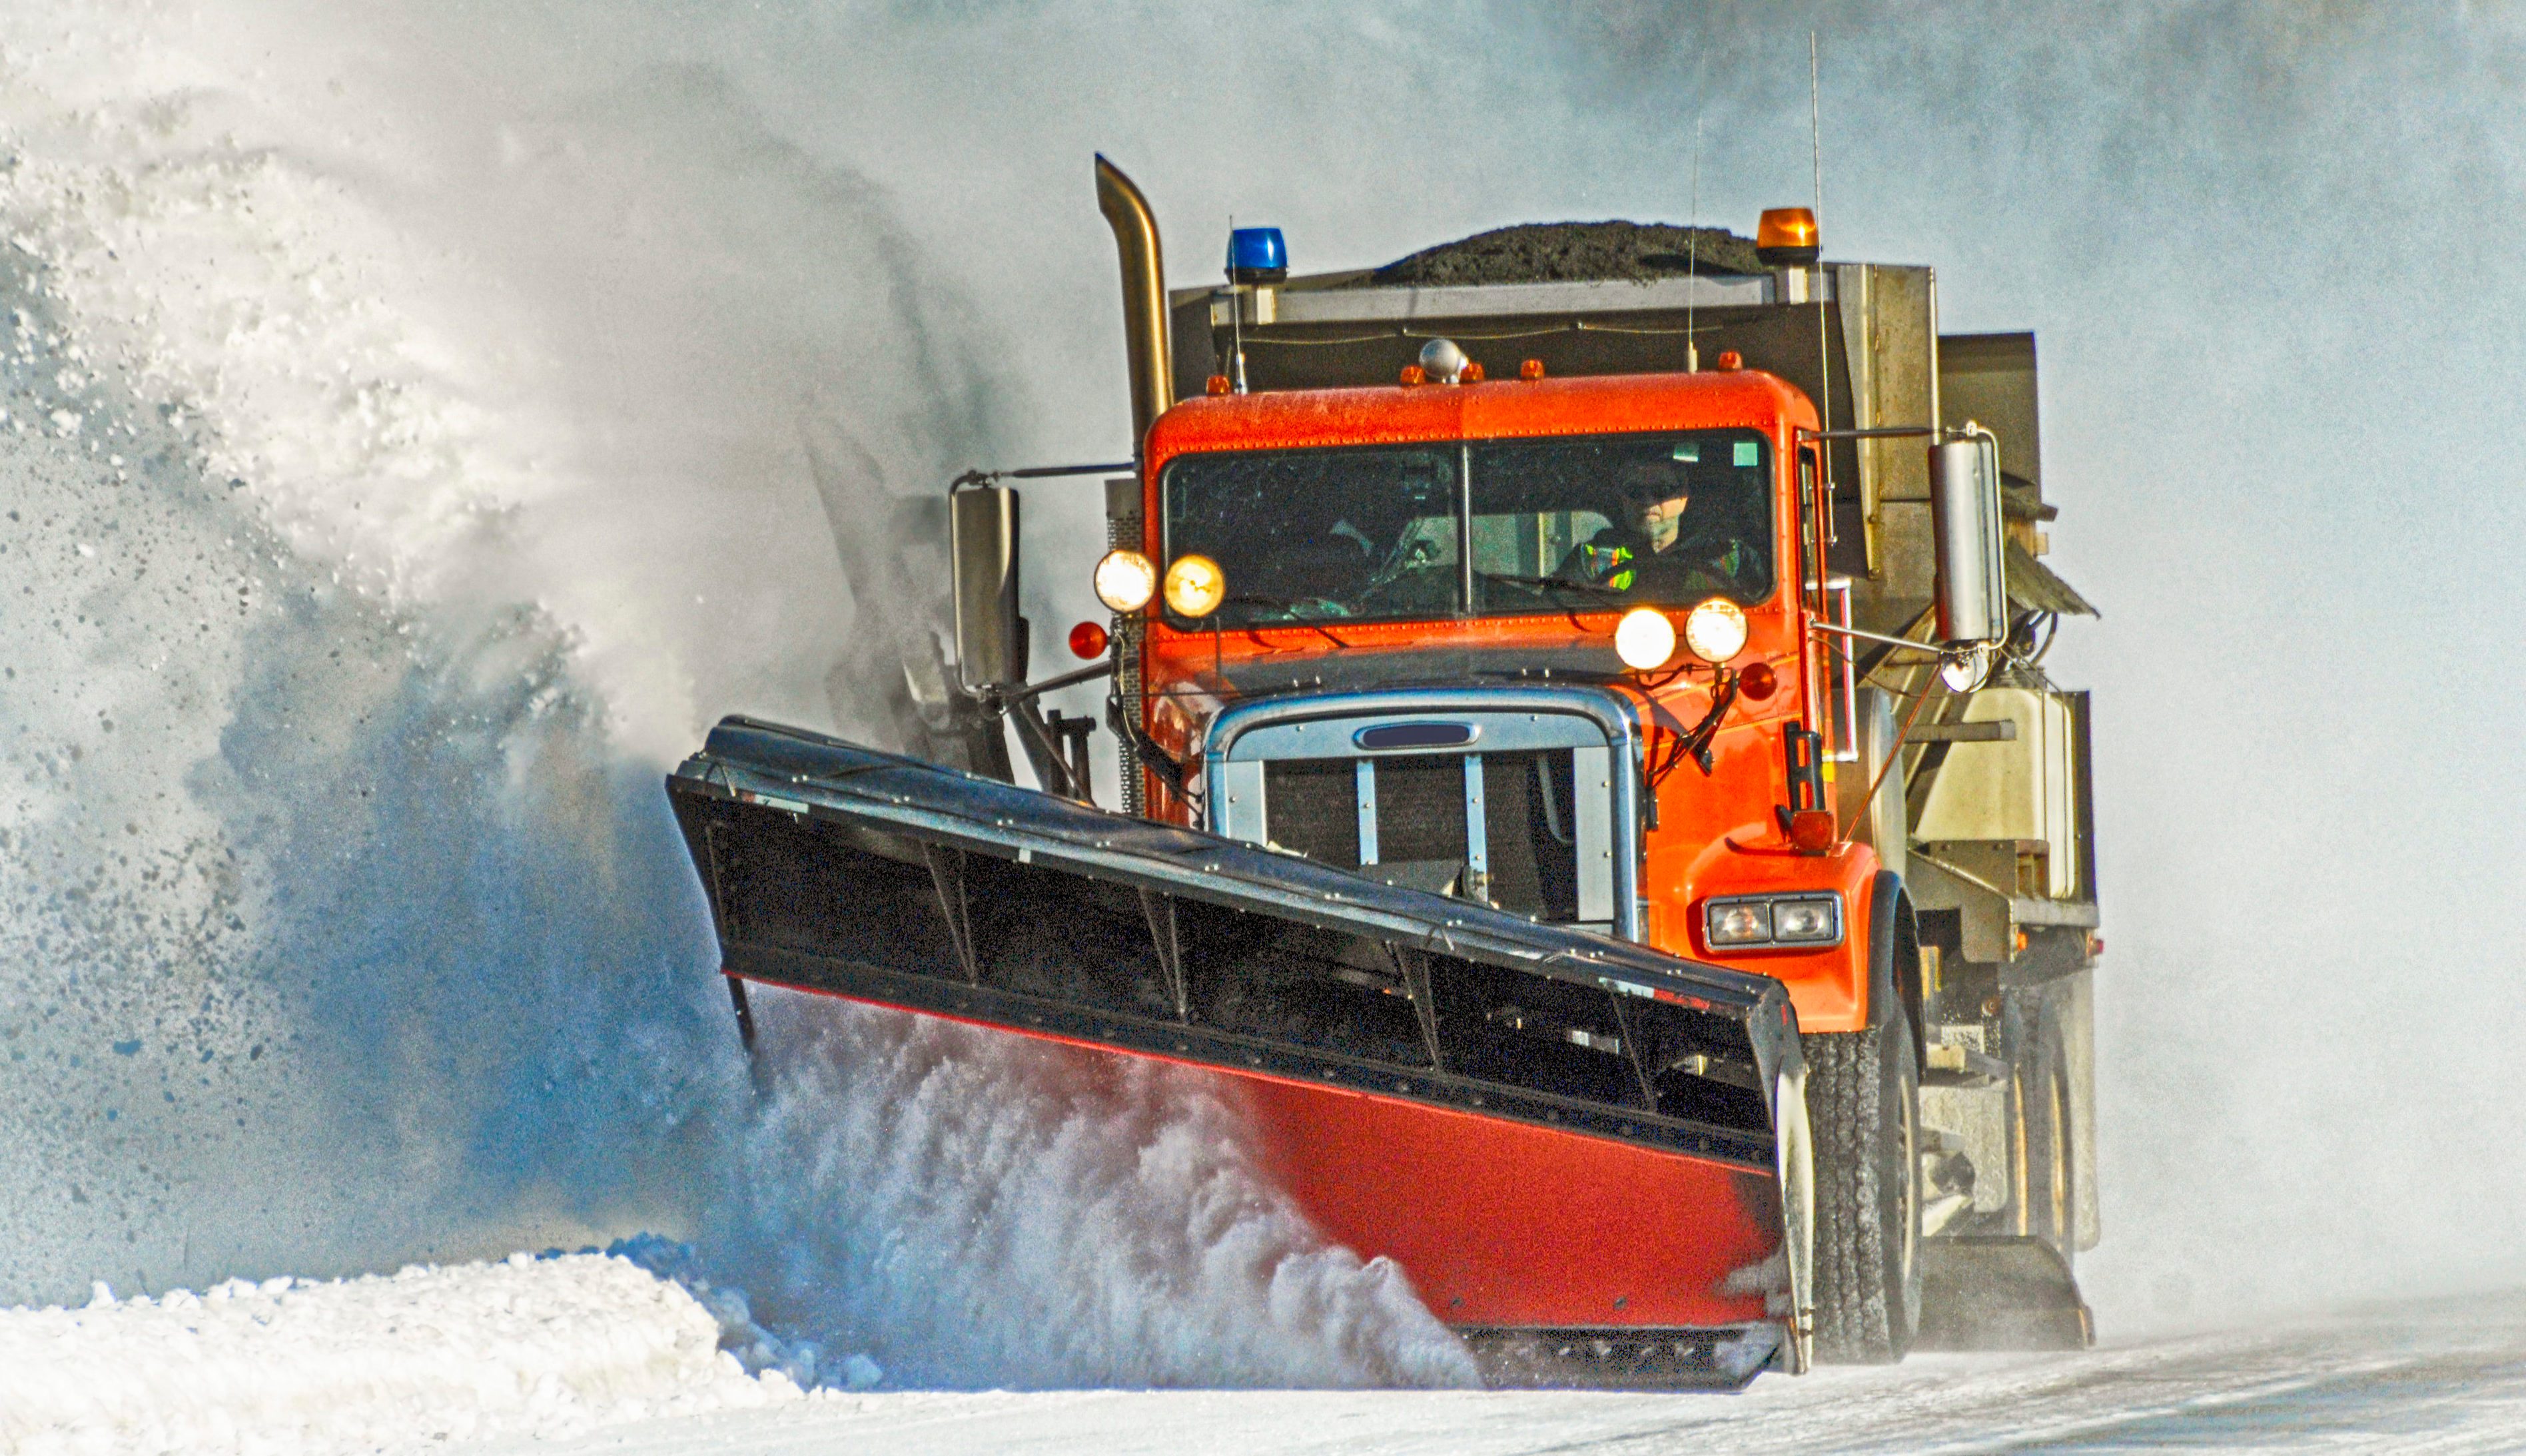 How to stay safe when using a snow plow and other snow removal